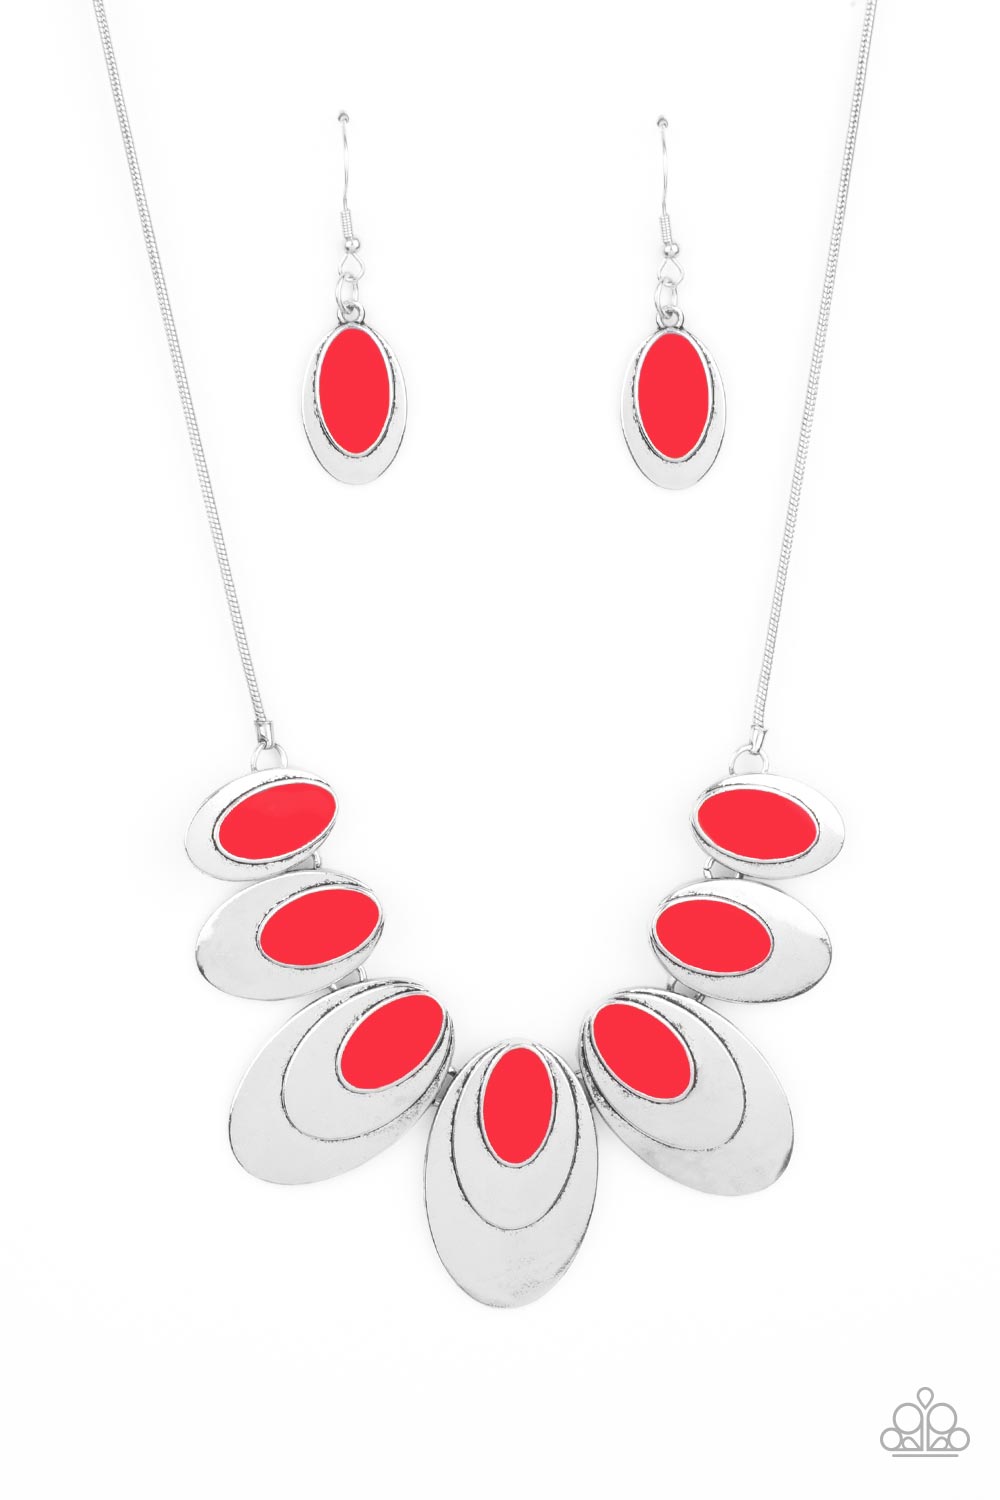 Endless Eclipse - red - Paparazzi necklace